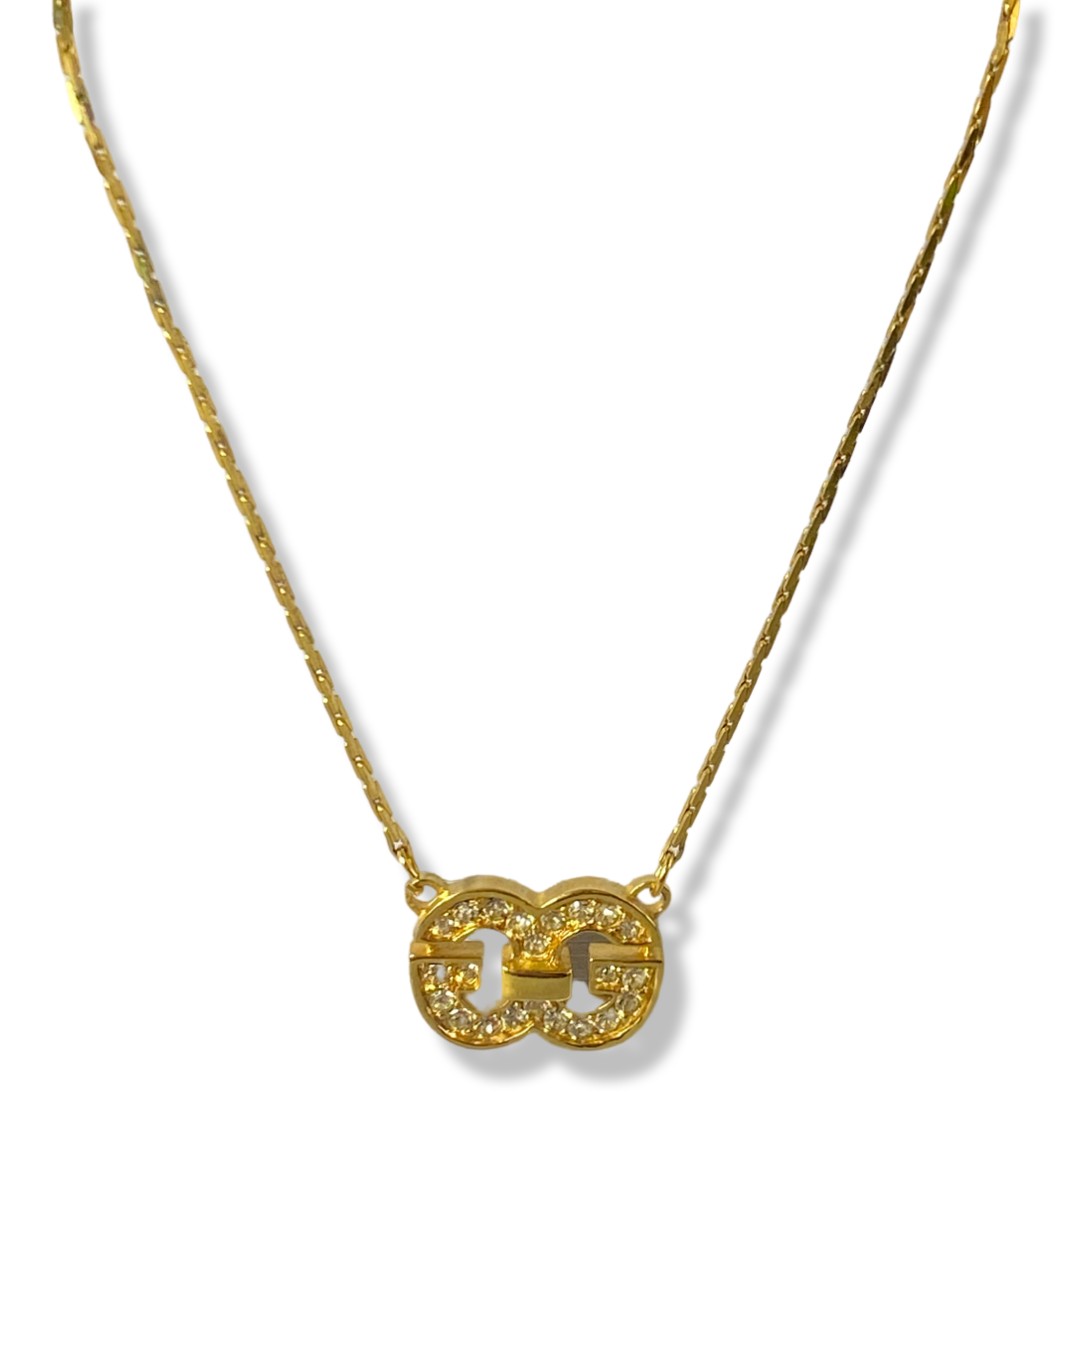 Givenchy Gold Tone 'G' Necklace weighing 7.37 grams measuring 38cm in length